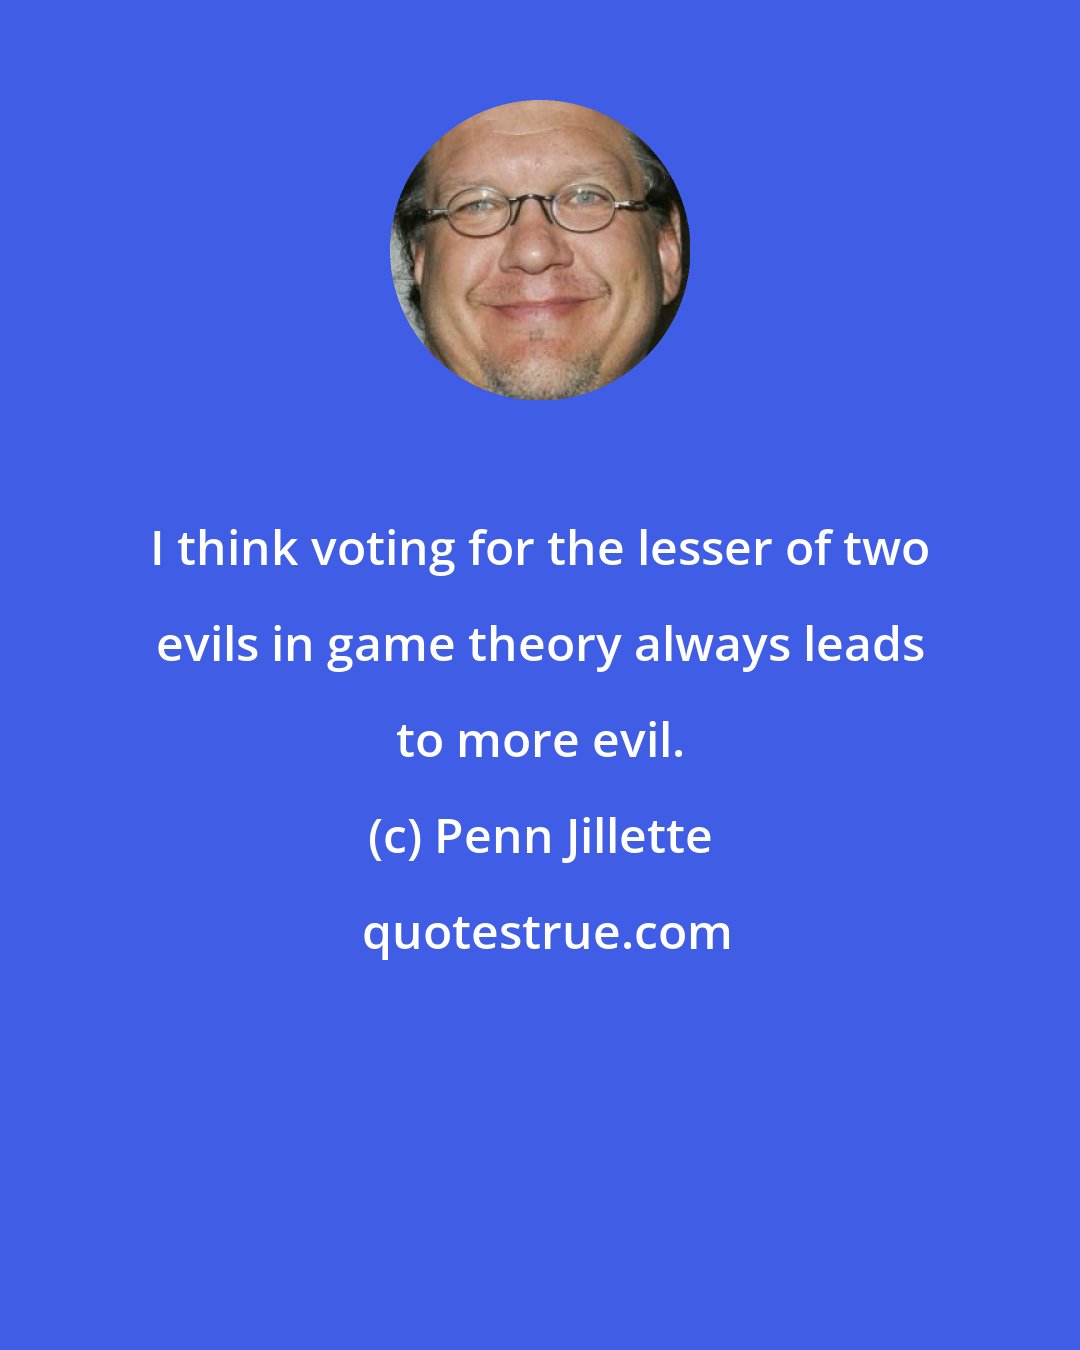 Penn Jillette: I think voting for the lesser of two evils in game theory always leads to more evil.